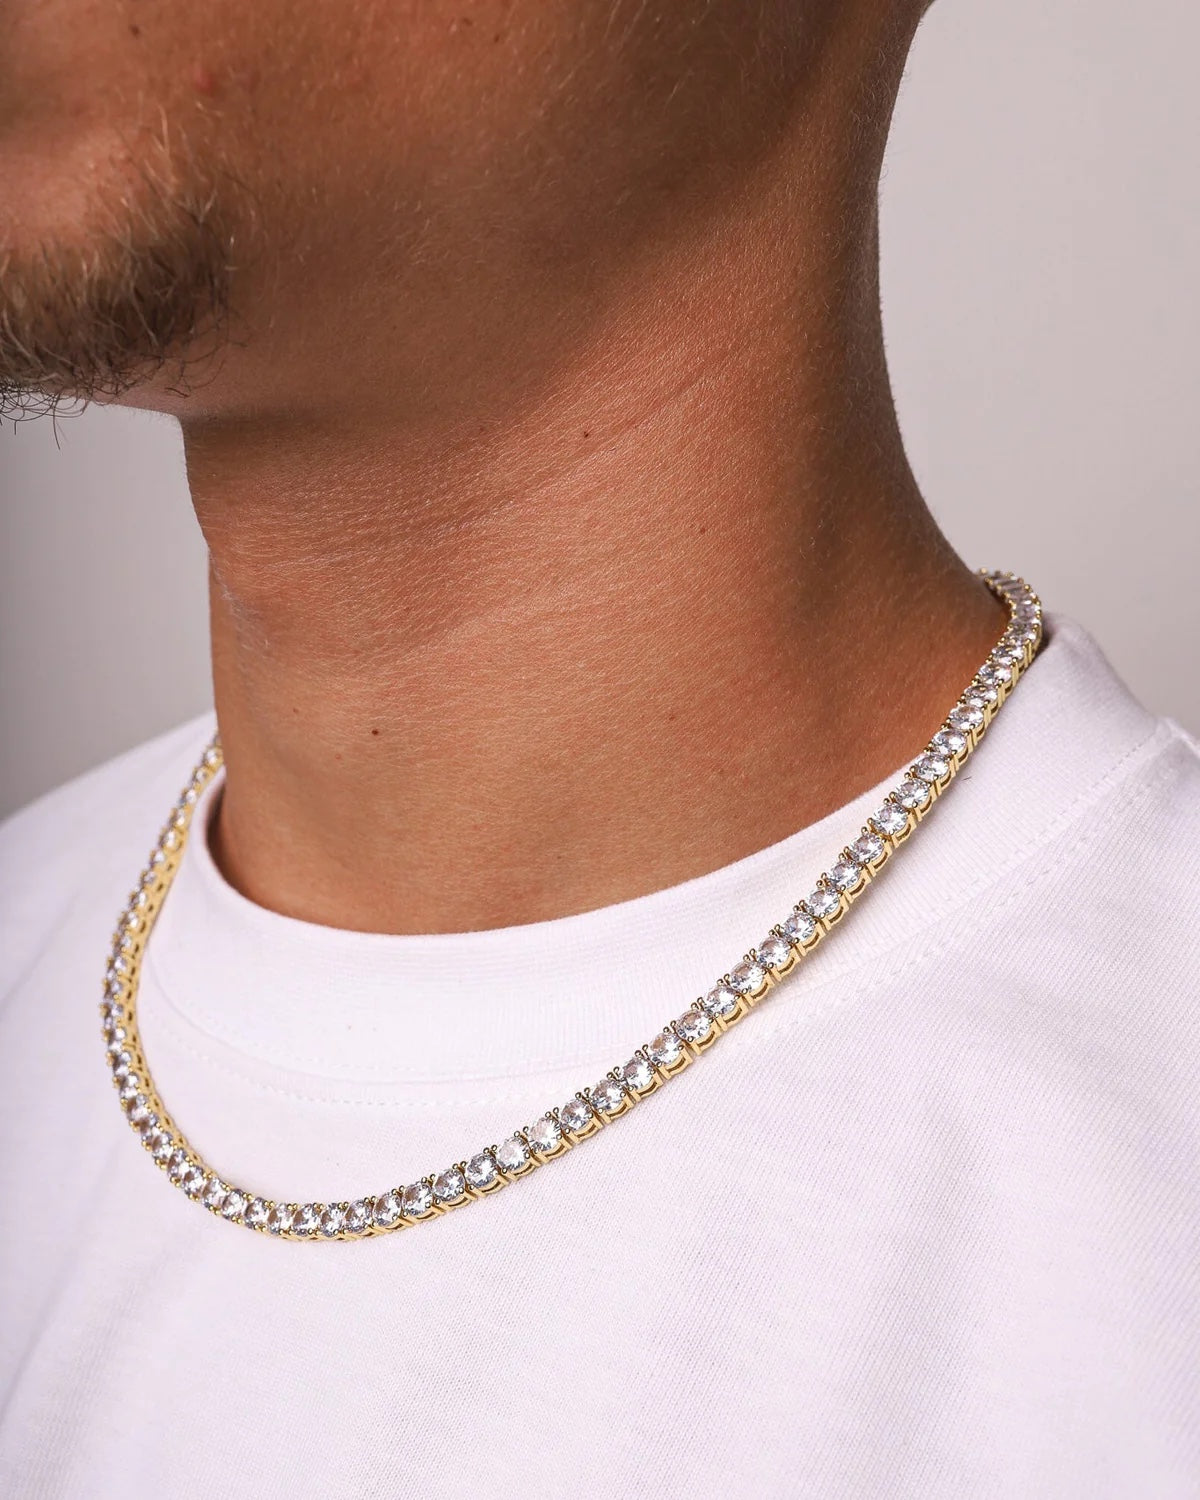 6MM VVS1/D Simulated Diamond Tennis Chain Necklace 14k White Gold Finish  20Inch | eBay